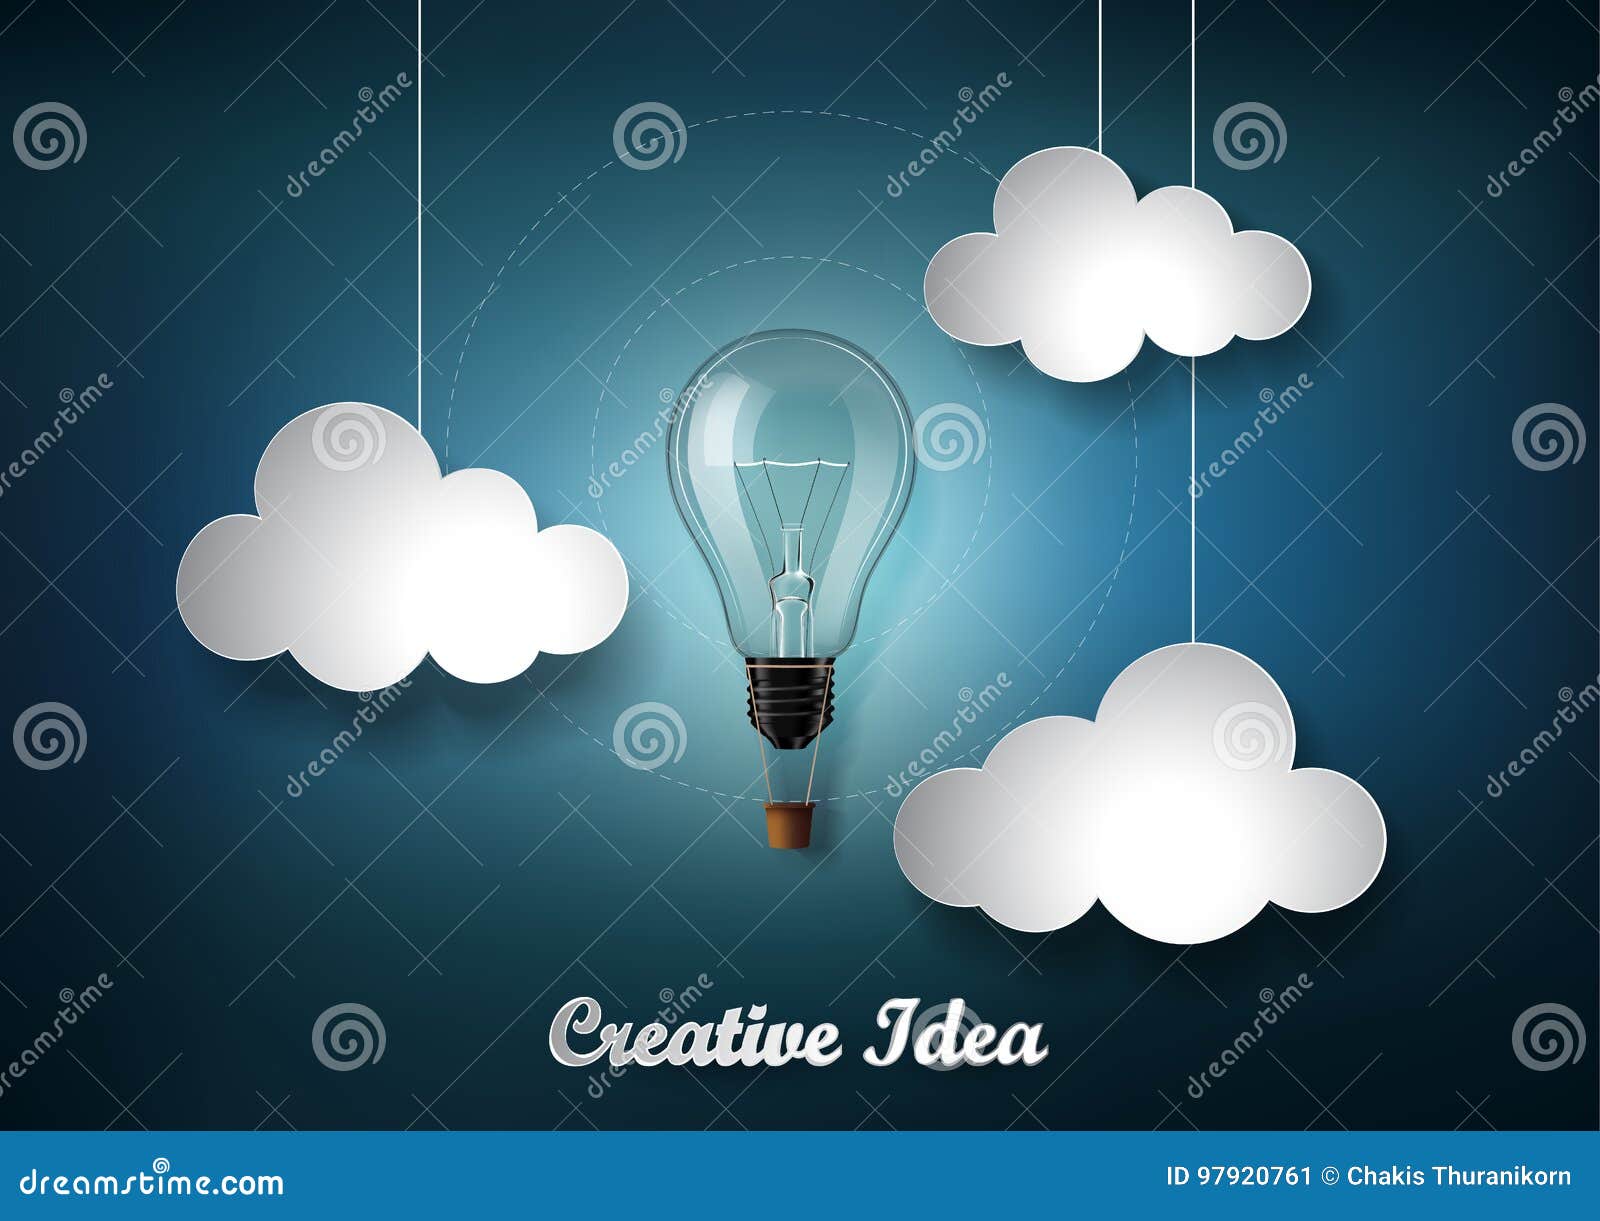 light bulb is among a lot of cloud on dark blue background with origami paper cut style, representation of creative business idea